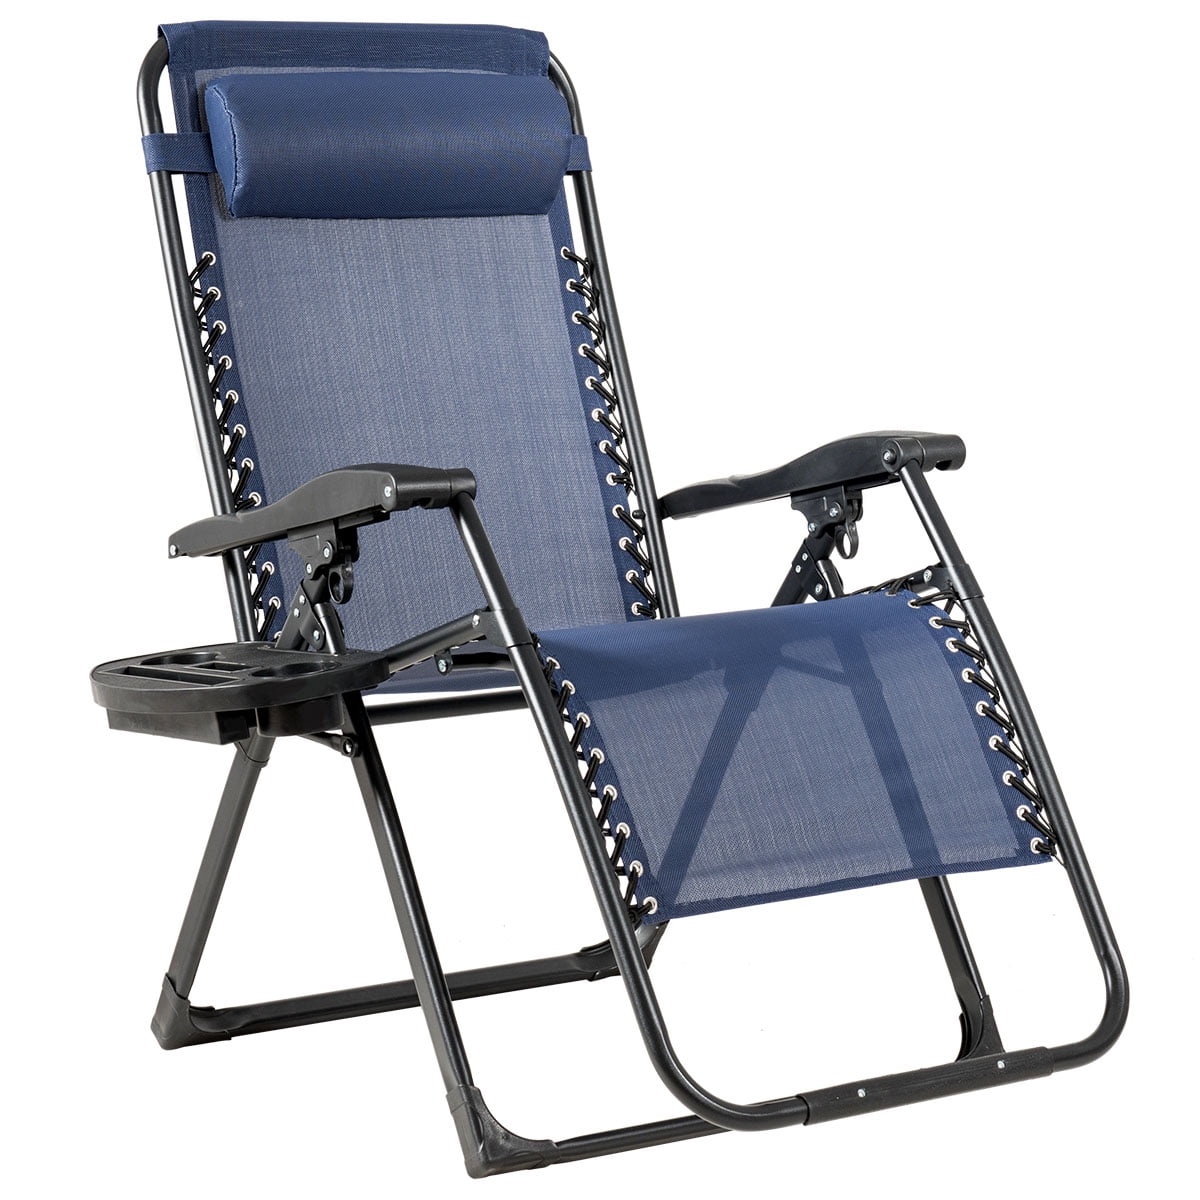 Set of 4 Zero Gravity Chairs Folding Lounge Beach Outdoor Patio Reclinable Blue 